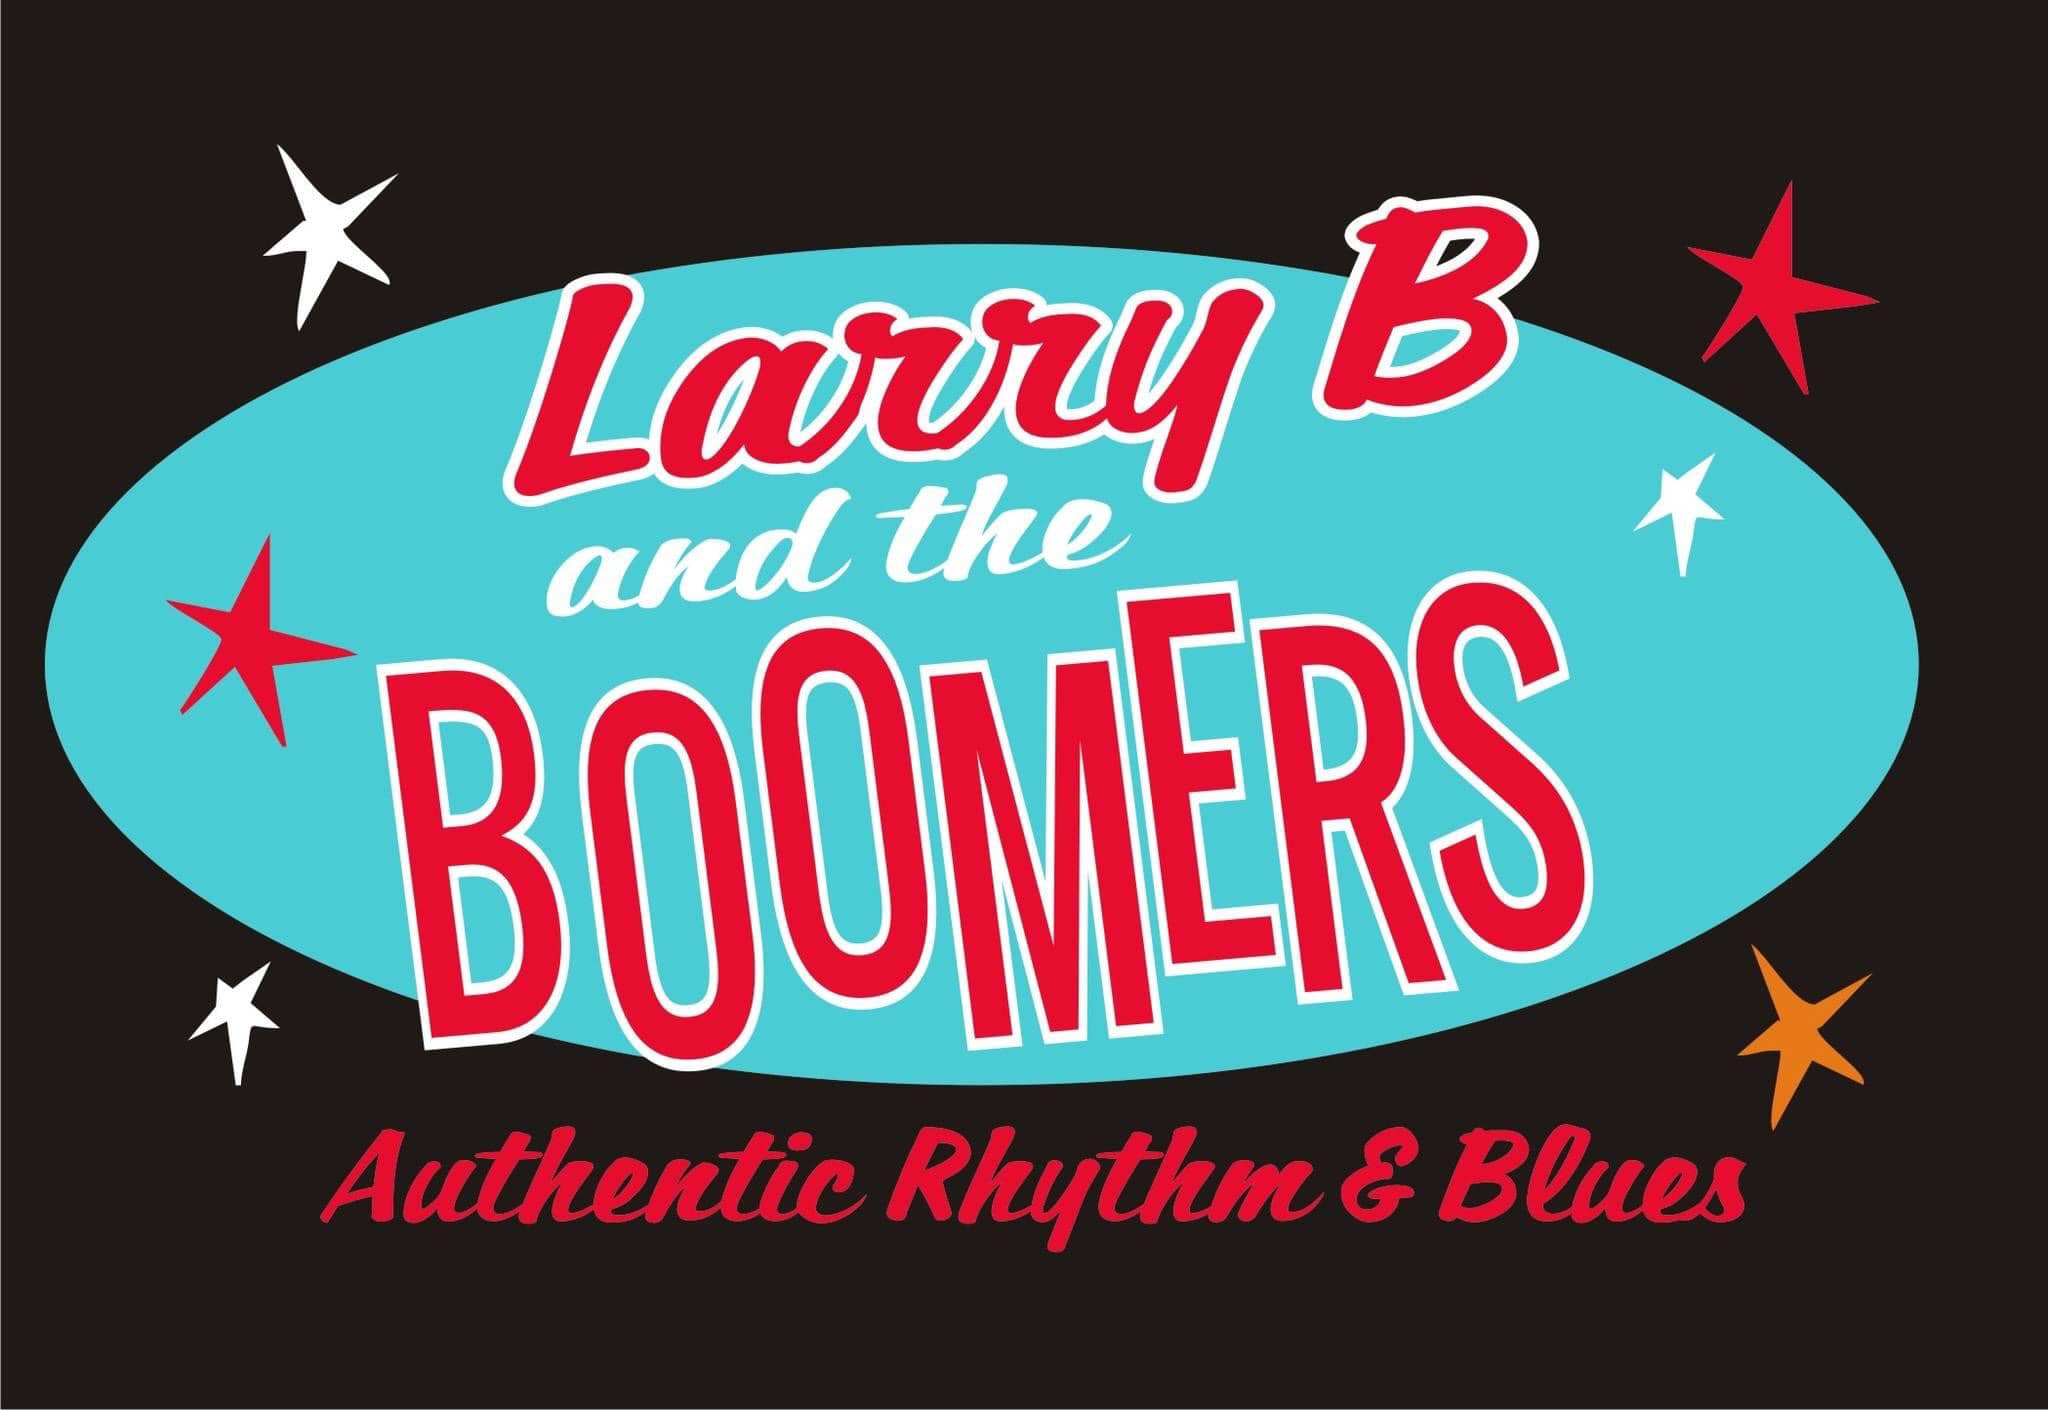 Larry B and the Boomers